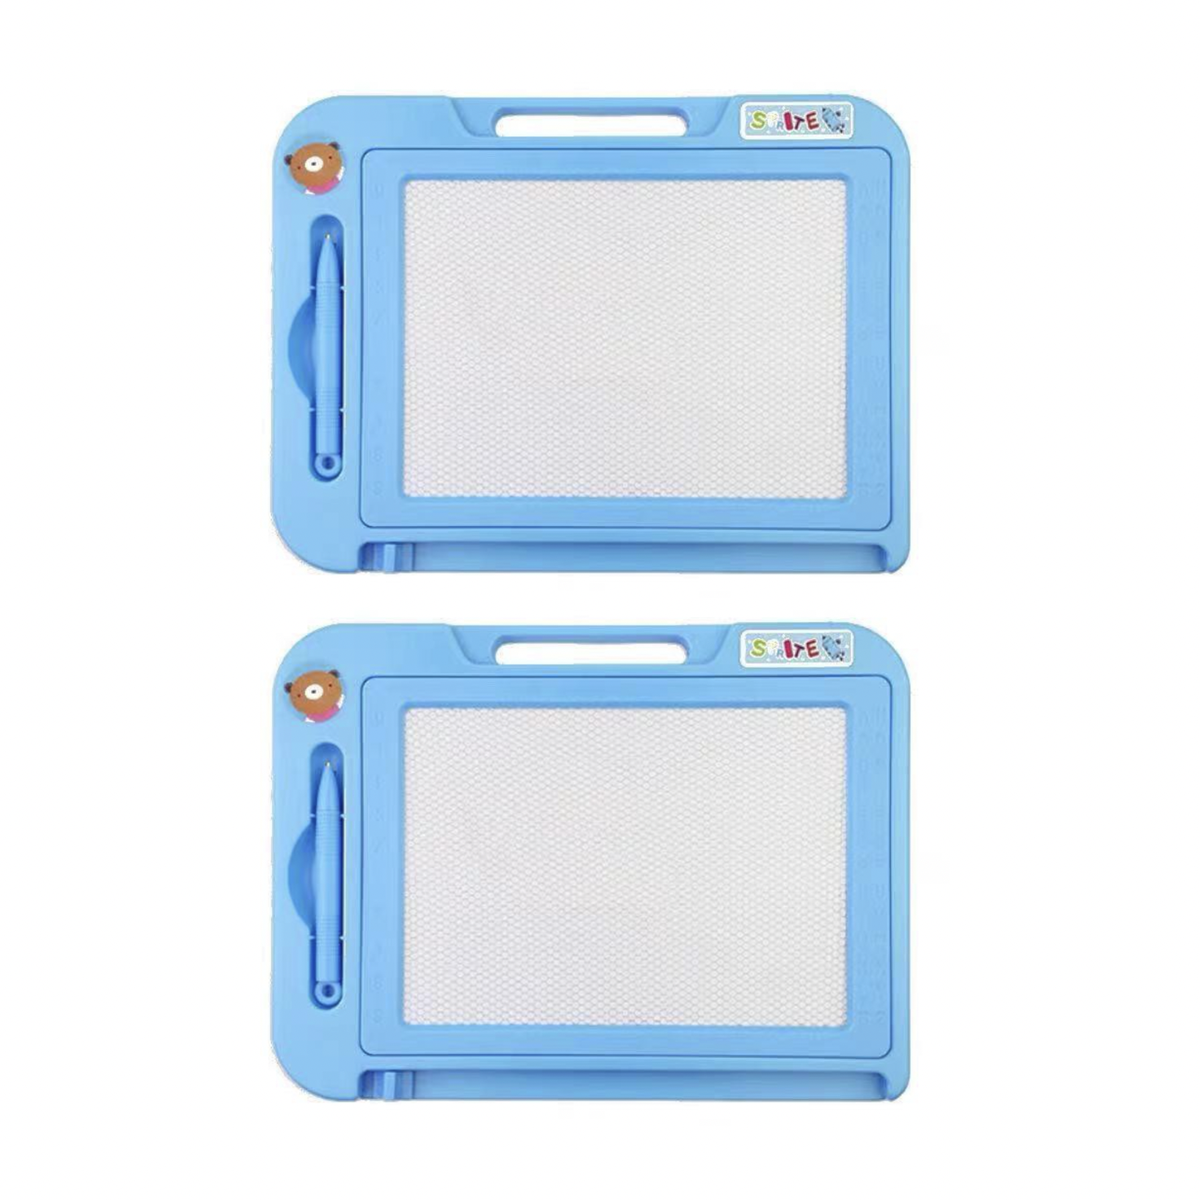 Kids Magnetic Erasable Drawing & Writing Board - 2 Pack | Shop Today ...